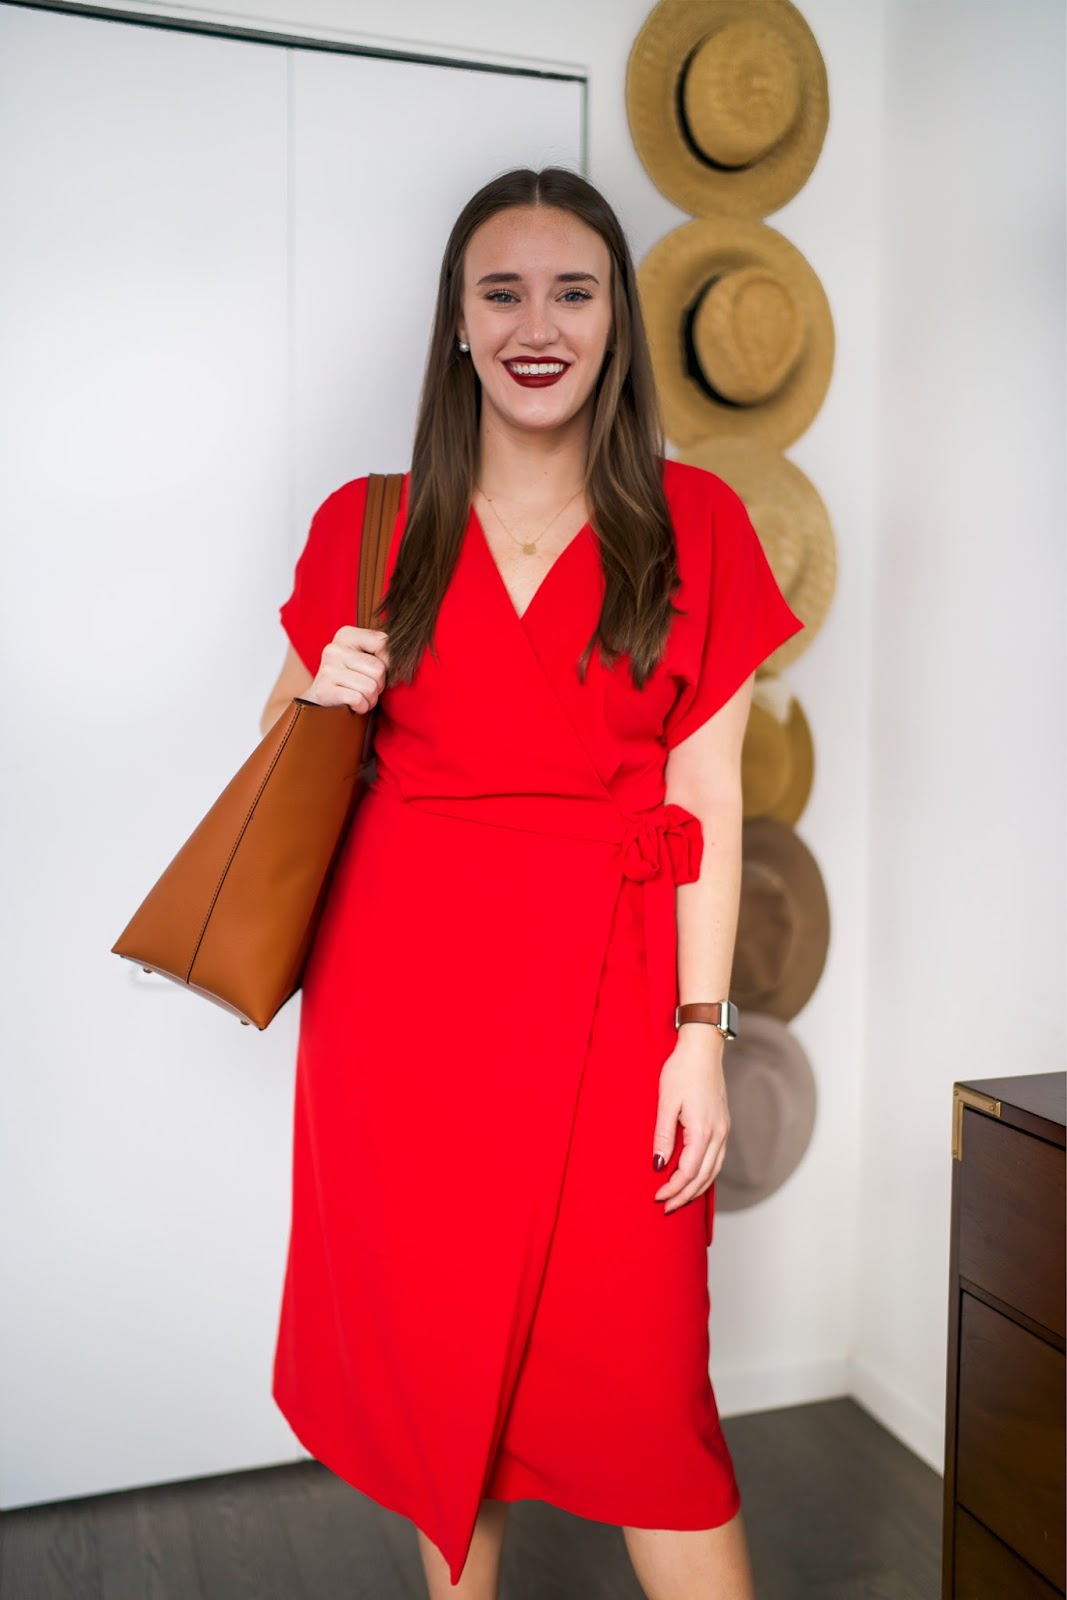 A Simple Office Look for the Work by popular New York fashion blogger Covering the Bases